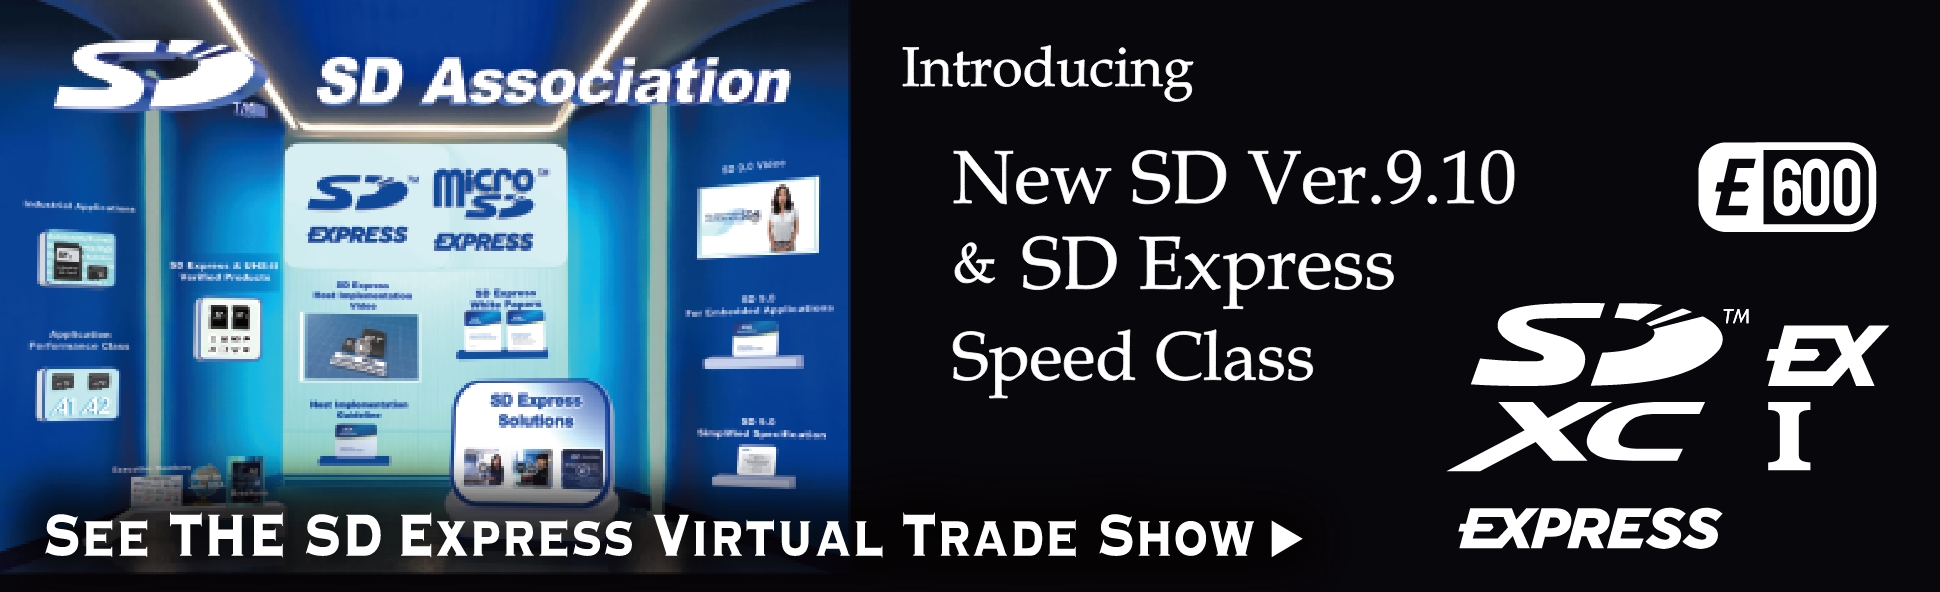 See the Sd express virtual trade show booth